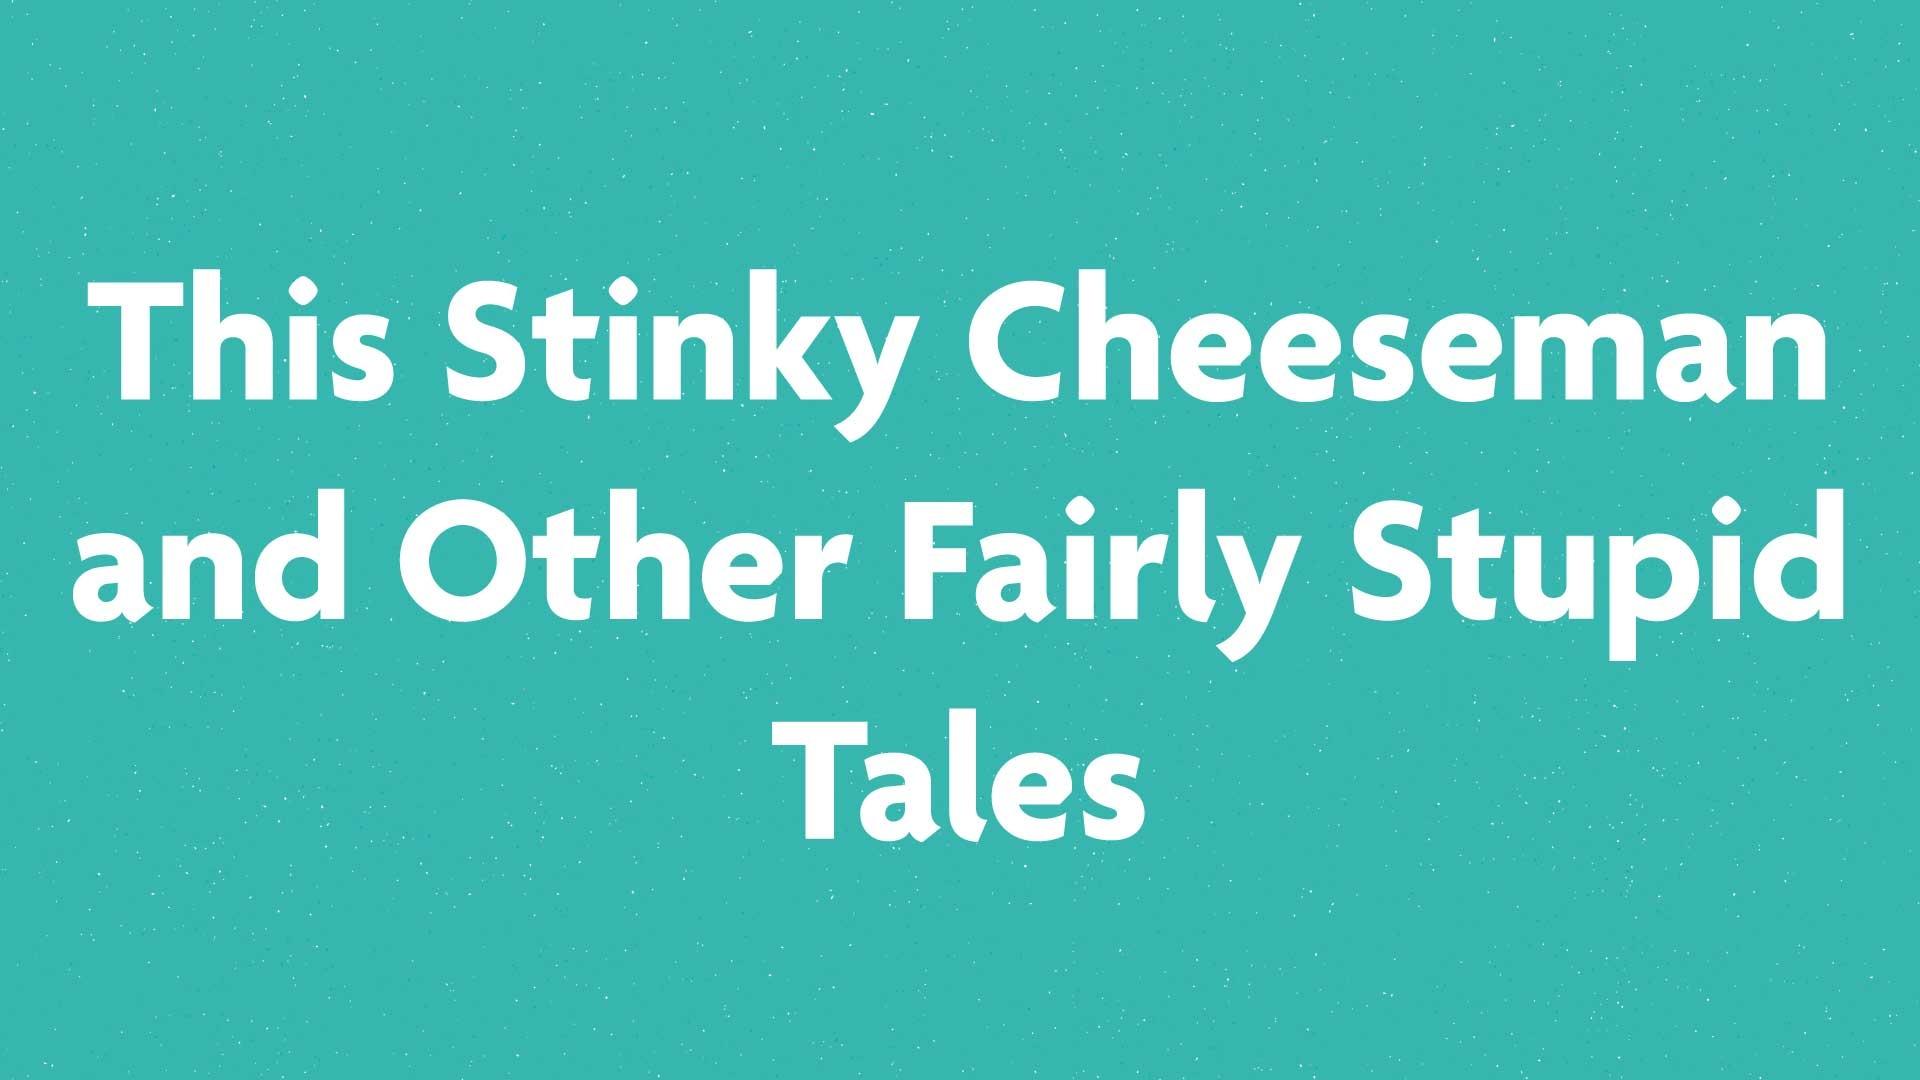 This Stinky Cheeseman and Other Fairly Stupid Tales book submission card on a green background.